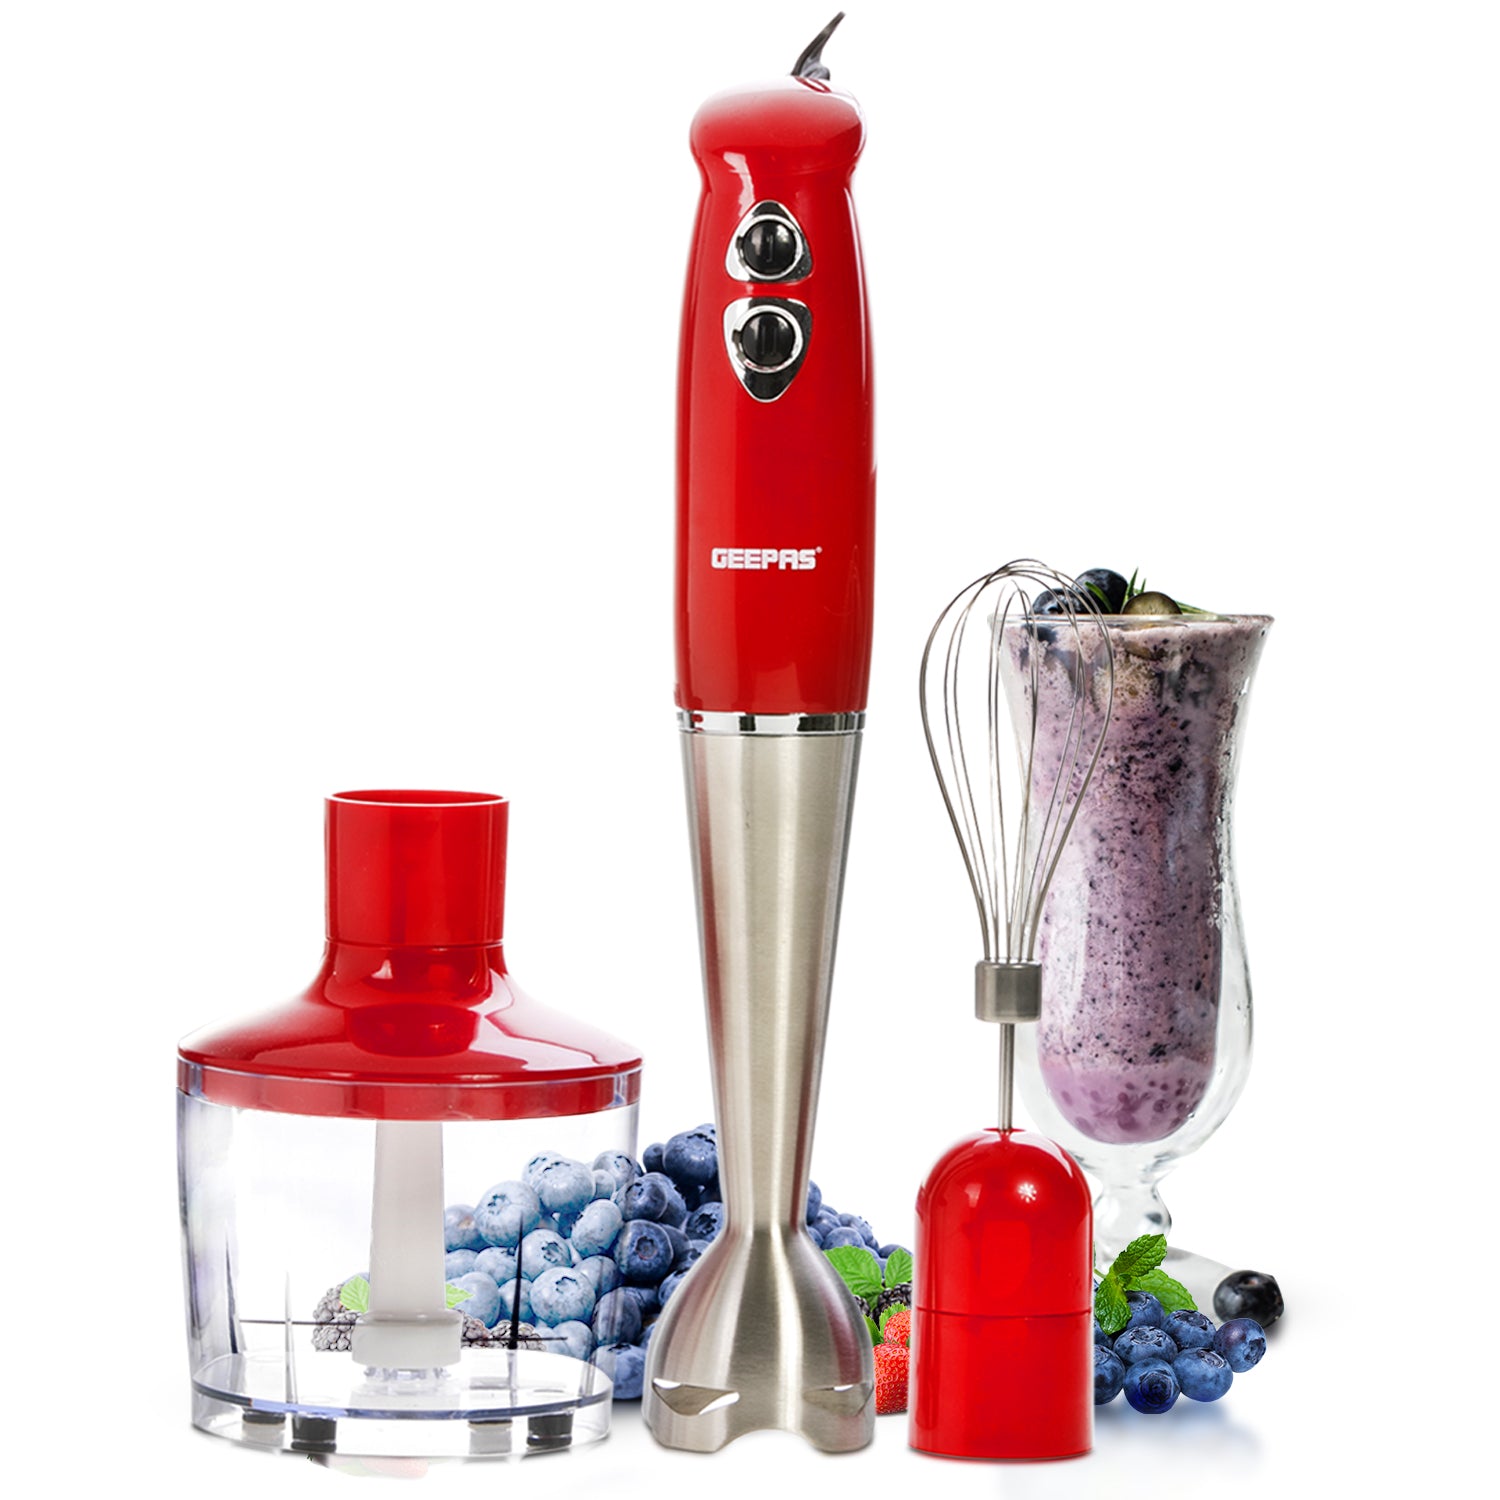 Photos - Mixer Geepas 3-In-1 Stick Hand Blender and Food Processor GHB6136UK 